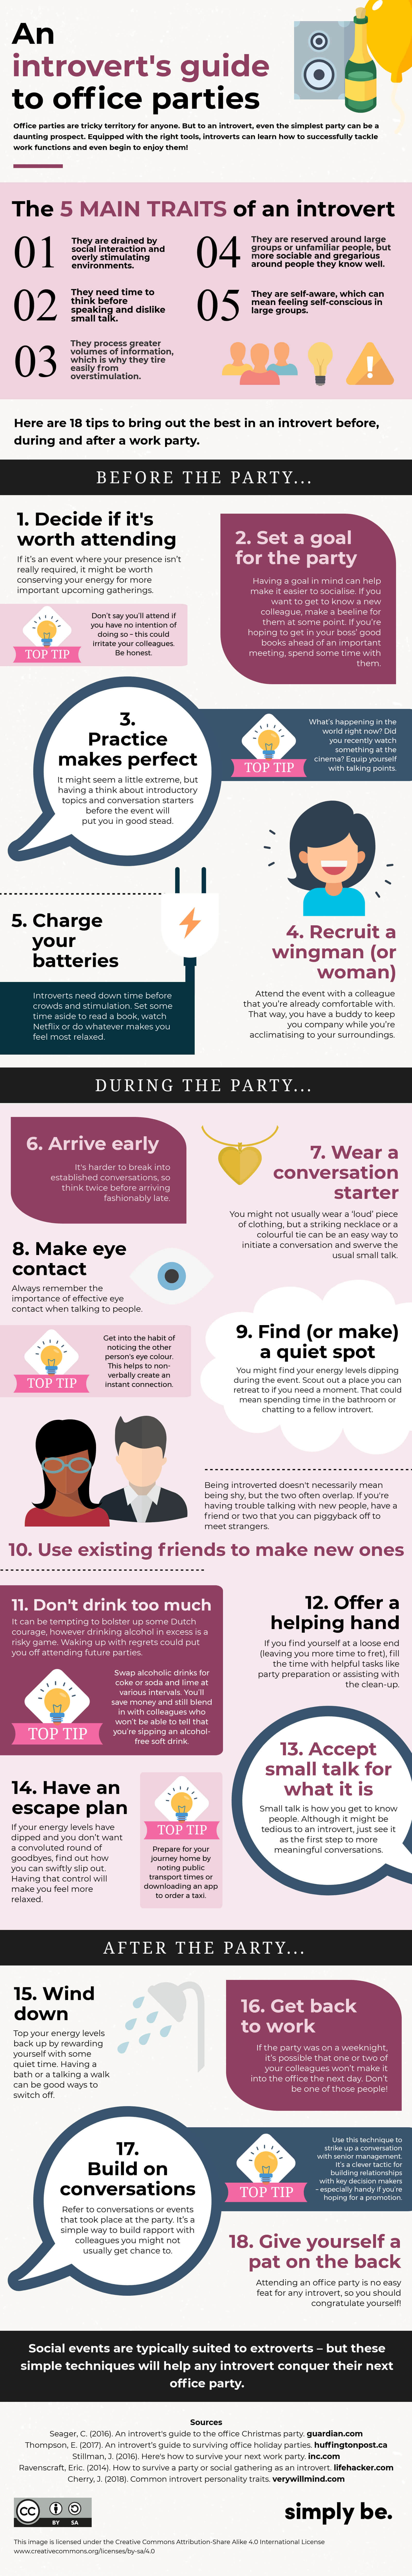 An Introvert’s Guide to Office Parties - Infographic